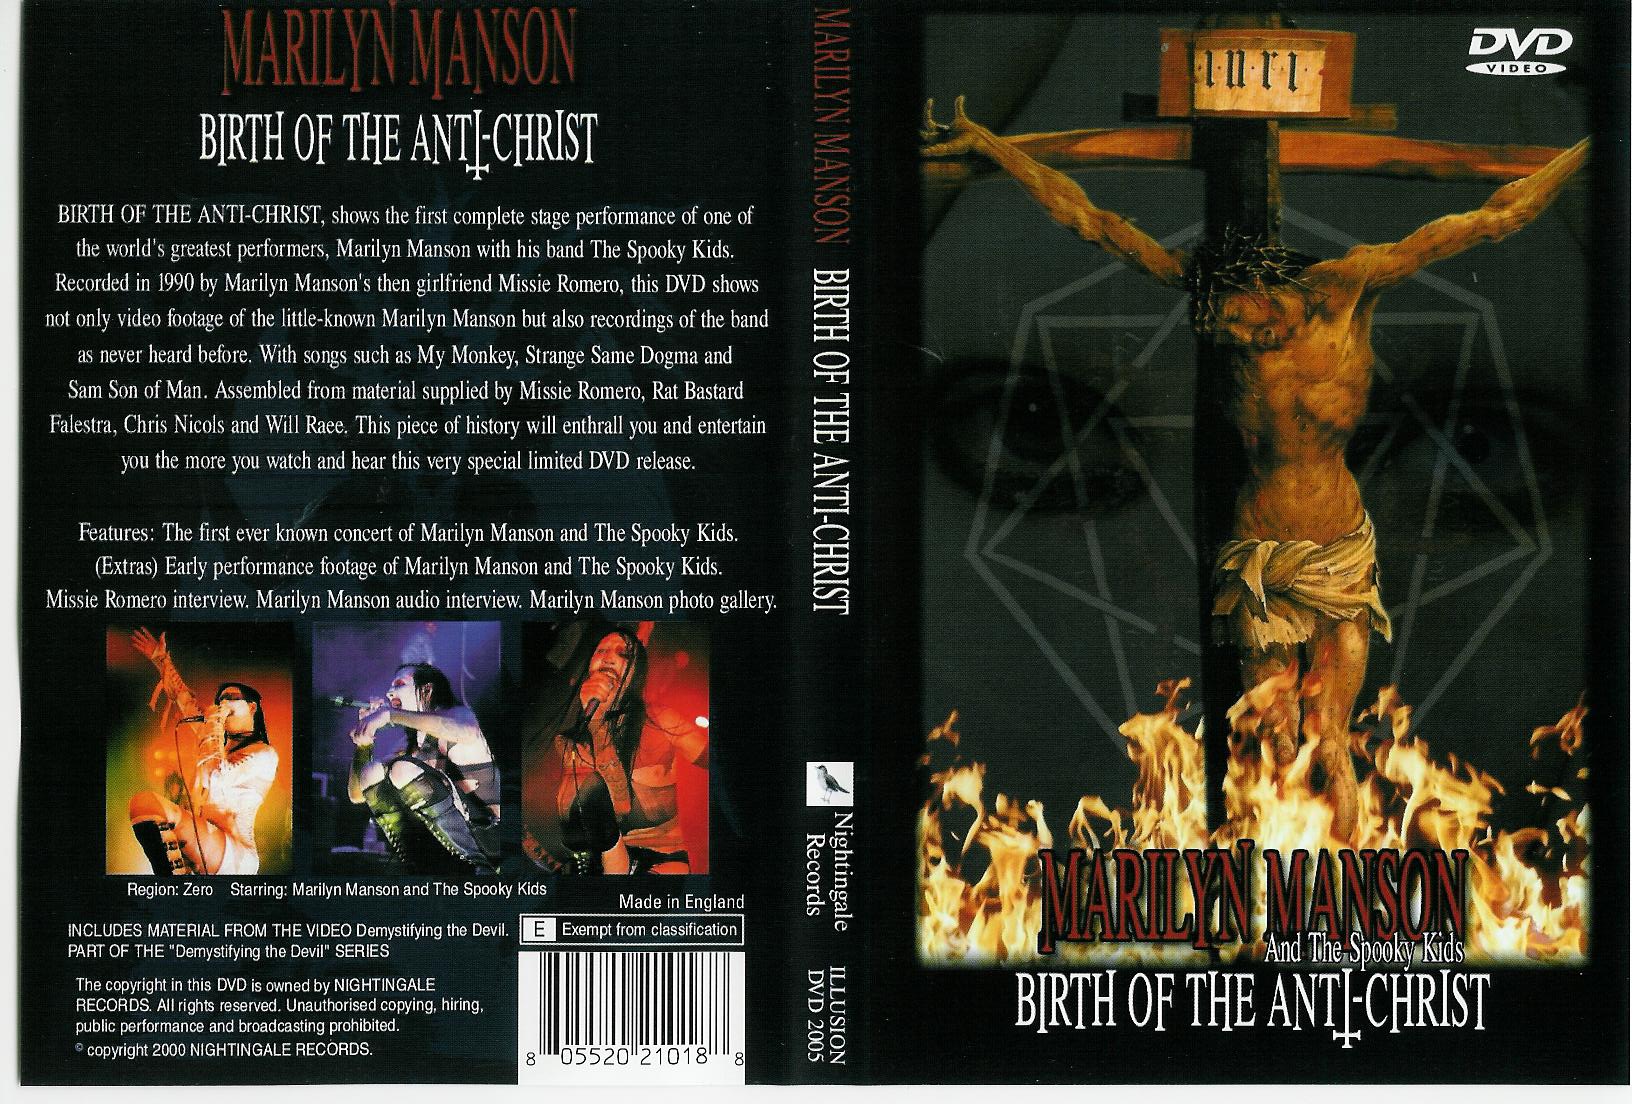 Jaquette DVD Marilyn manson - birth of the anti-christ